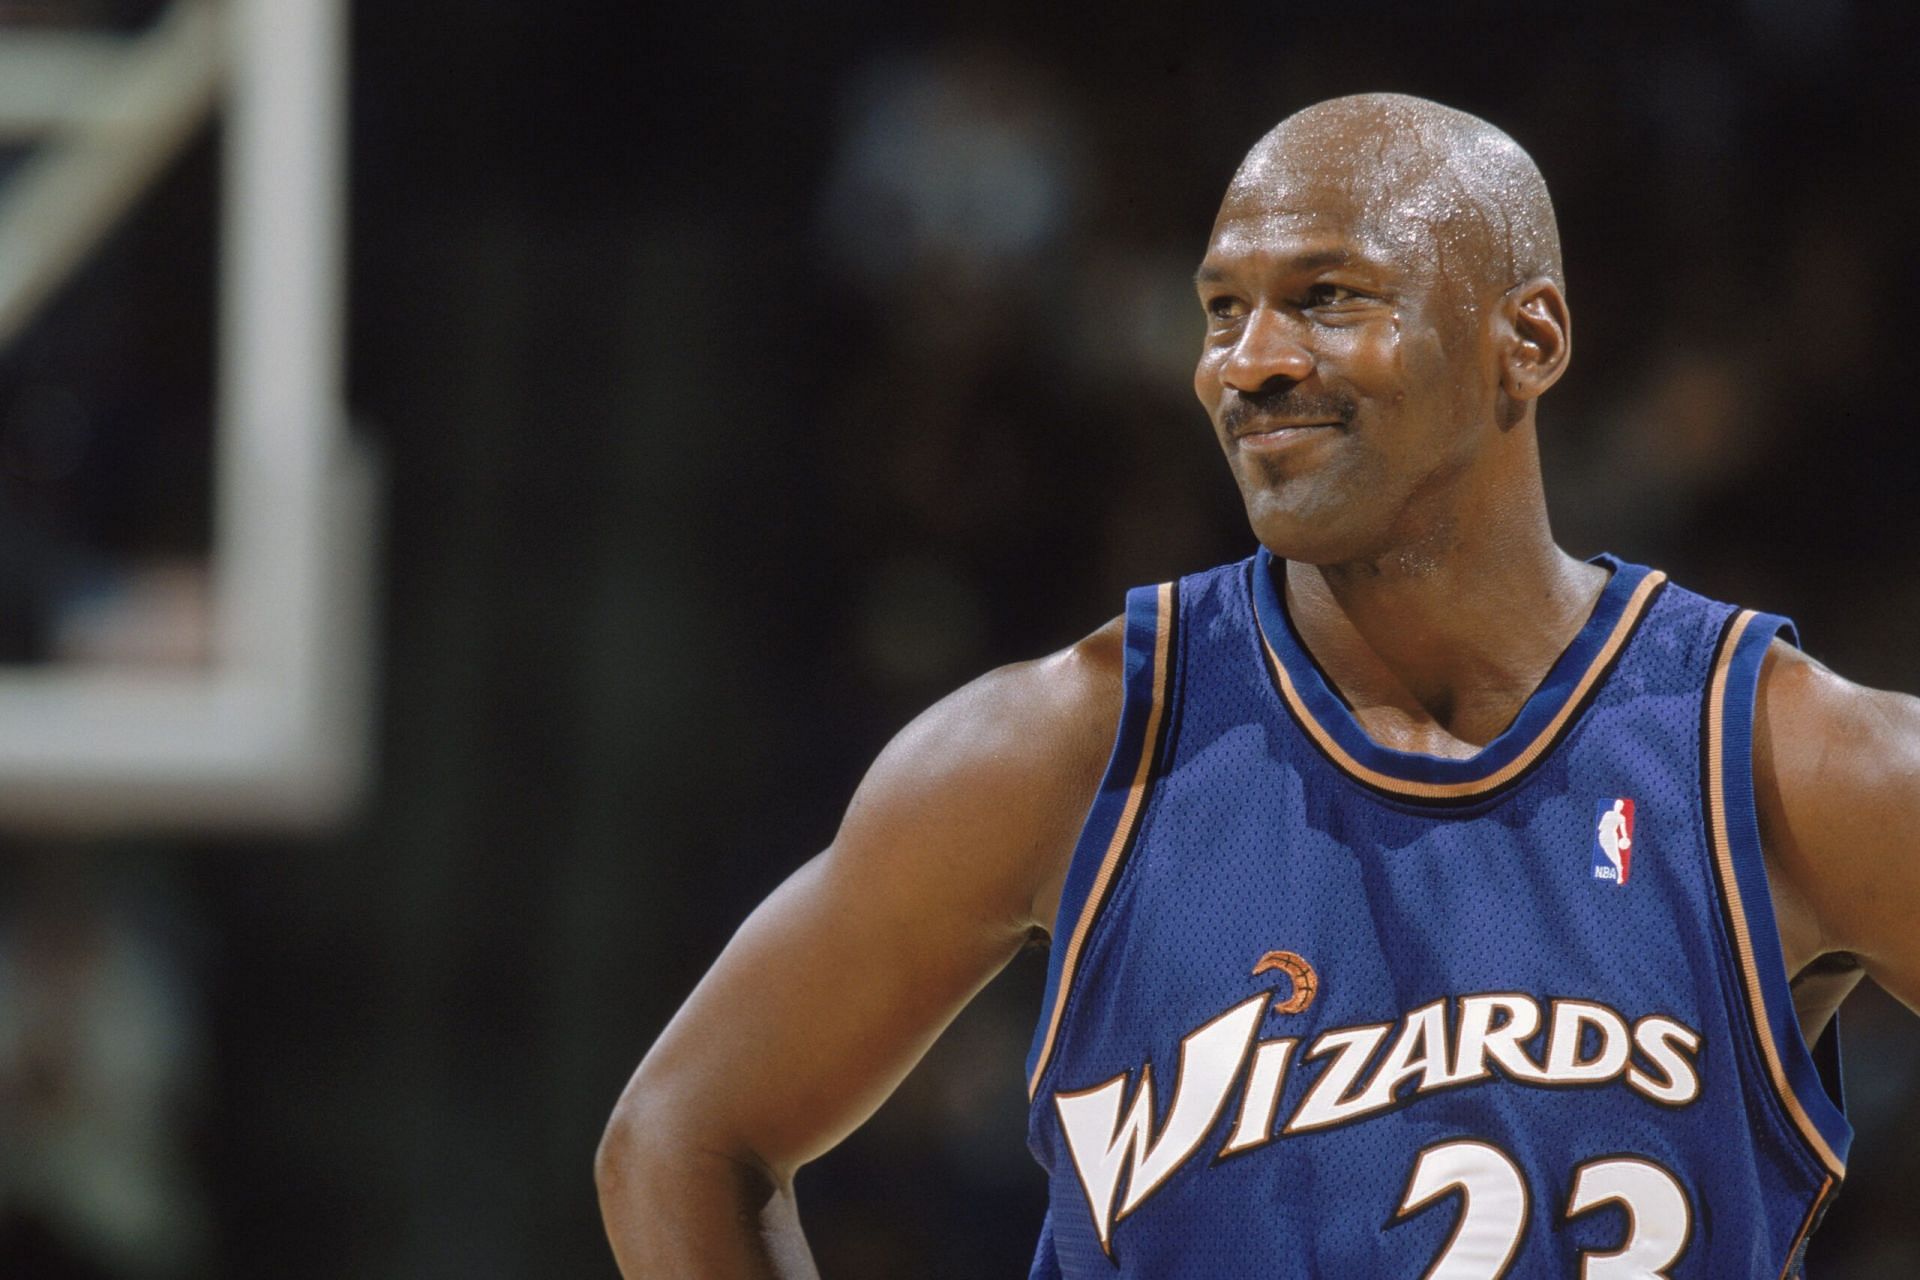 MJ ended his NBA career with the Washington Wizards